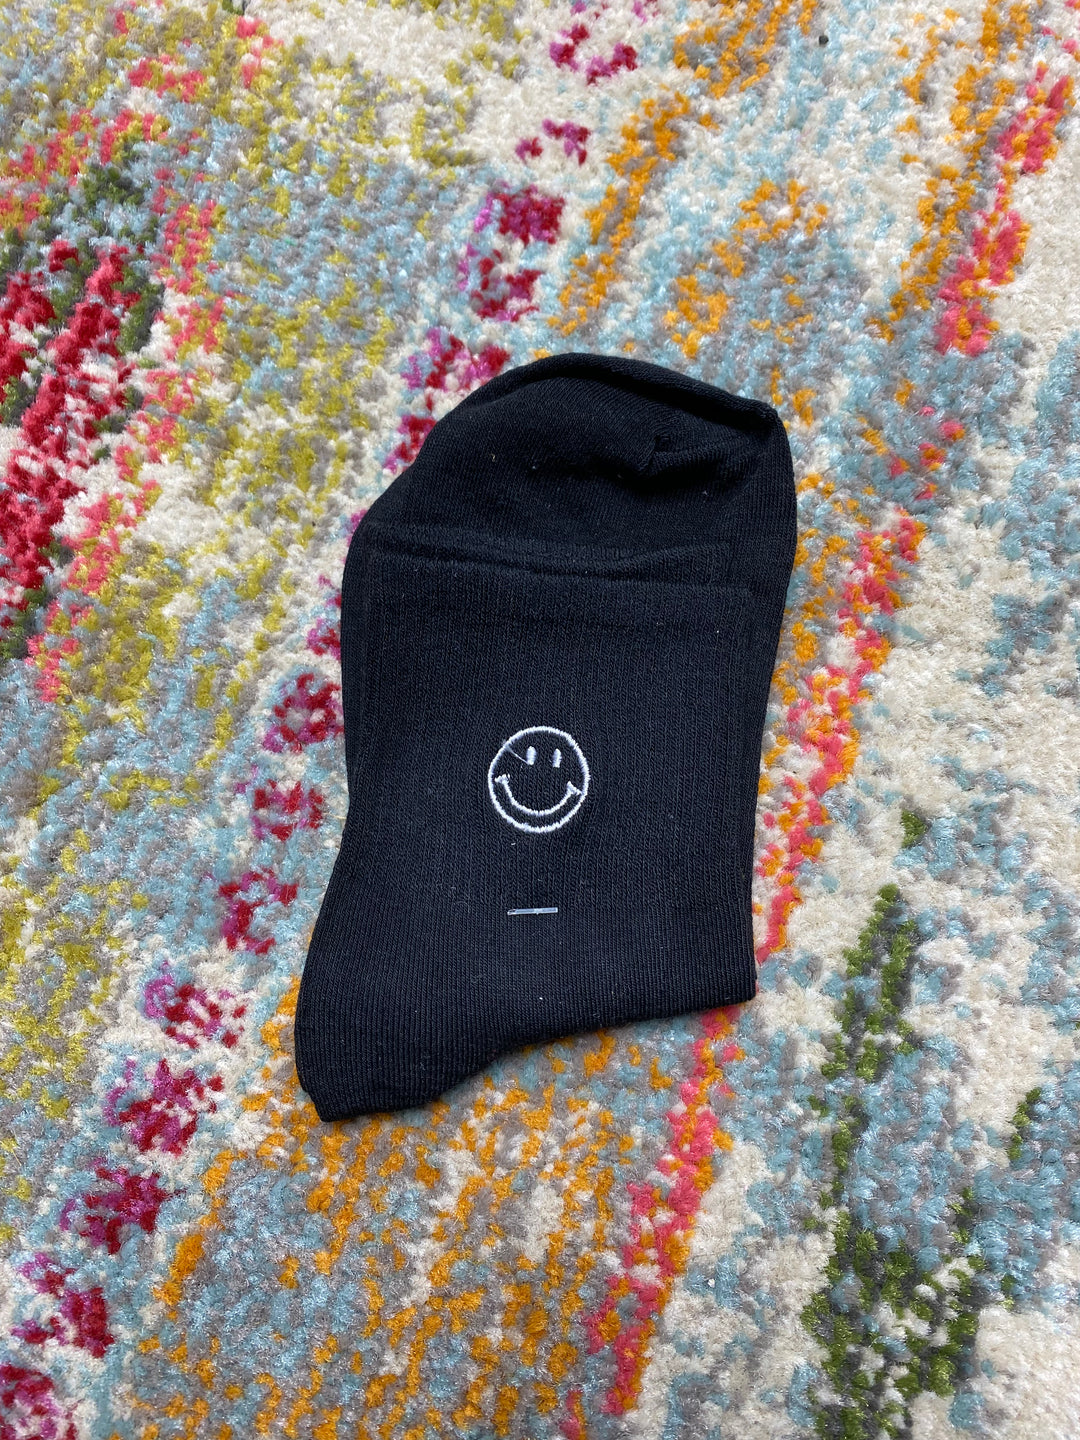 Embroidered Happy Socks